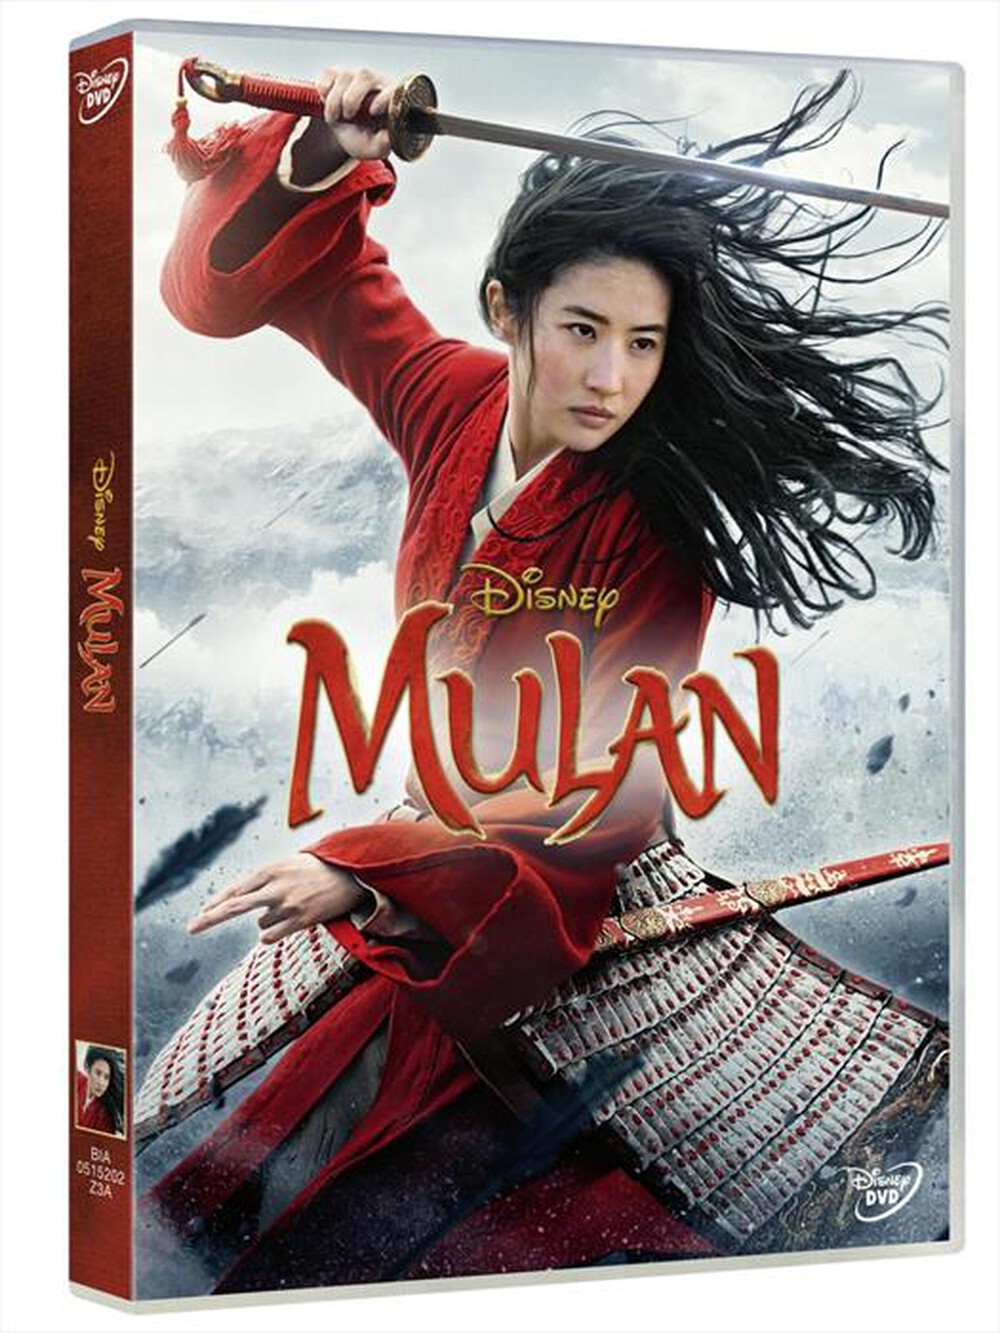 "EAGLE PICTURES - Mulan (Live Action)"